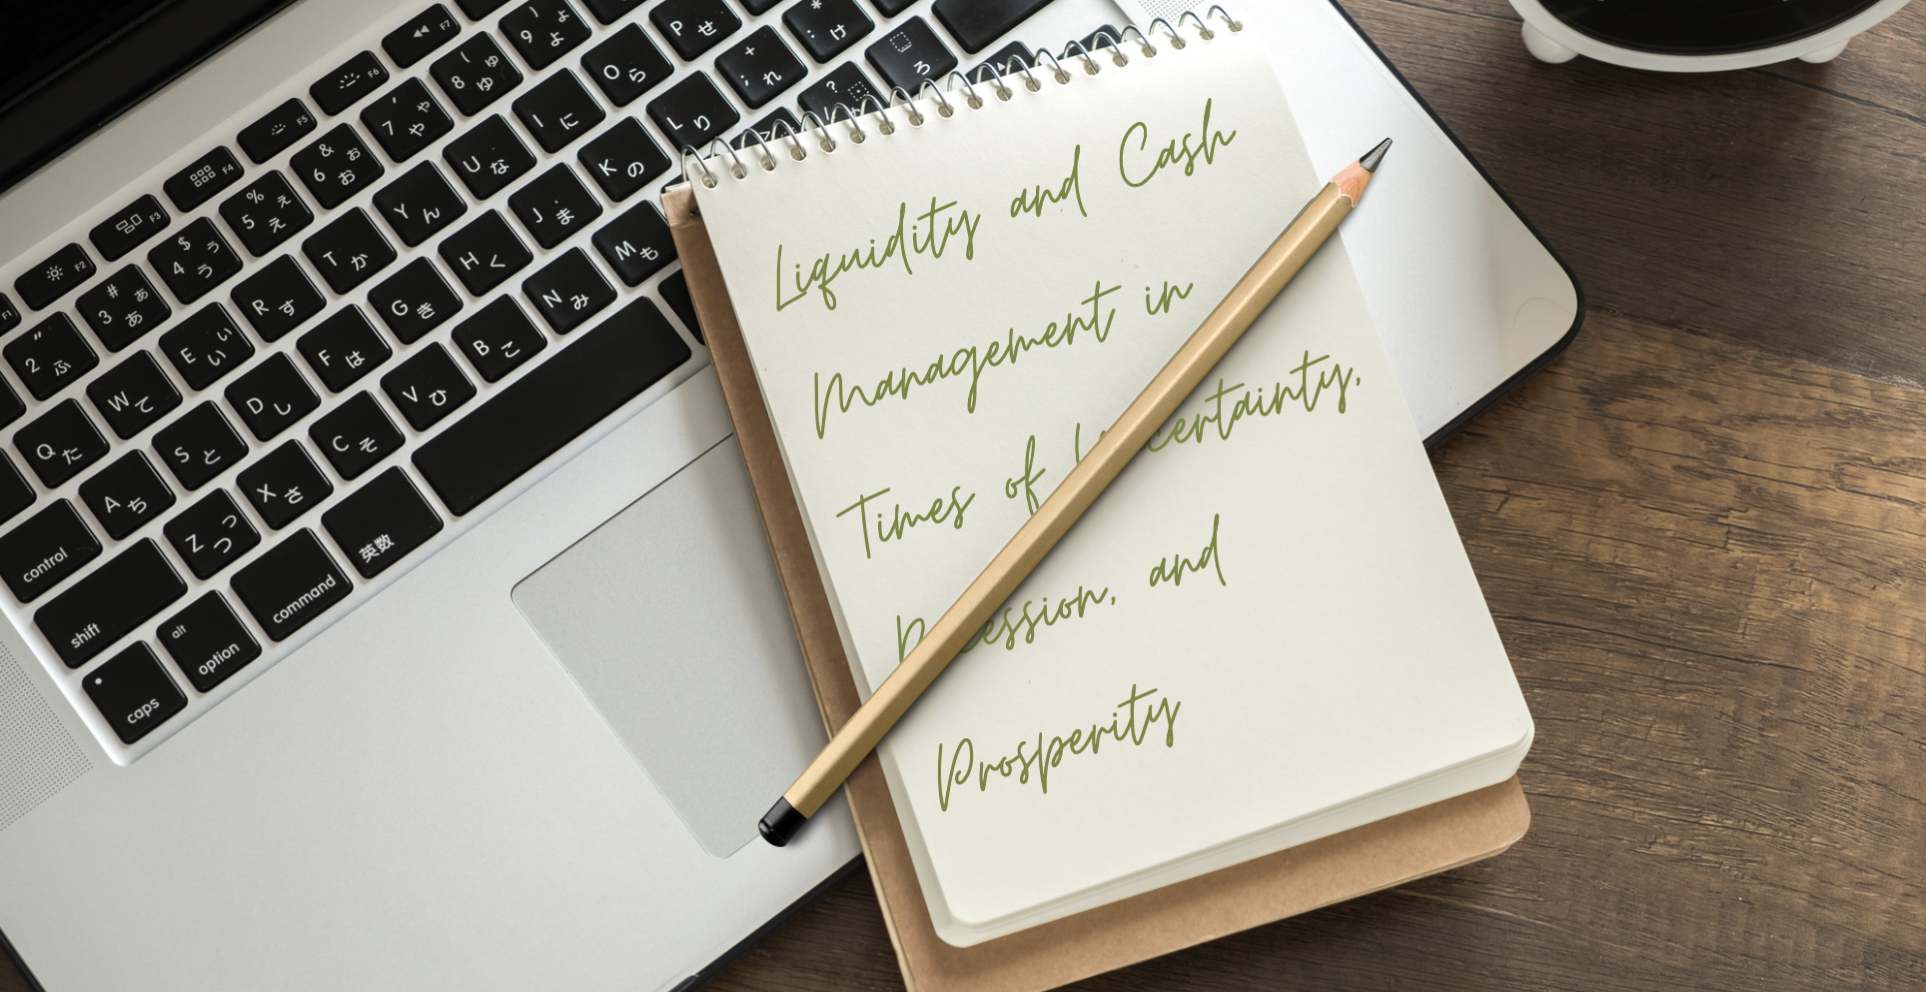 Liquidity and Cash Management in Times of Uncertainty, Recession, and Prosperity